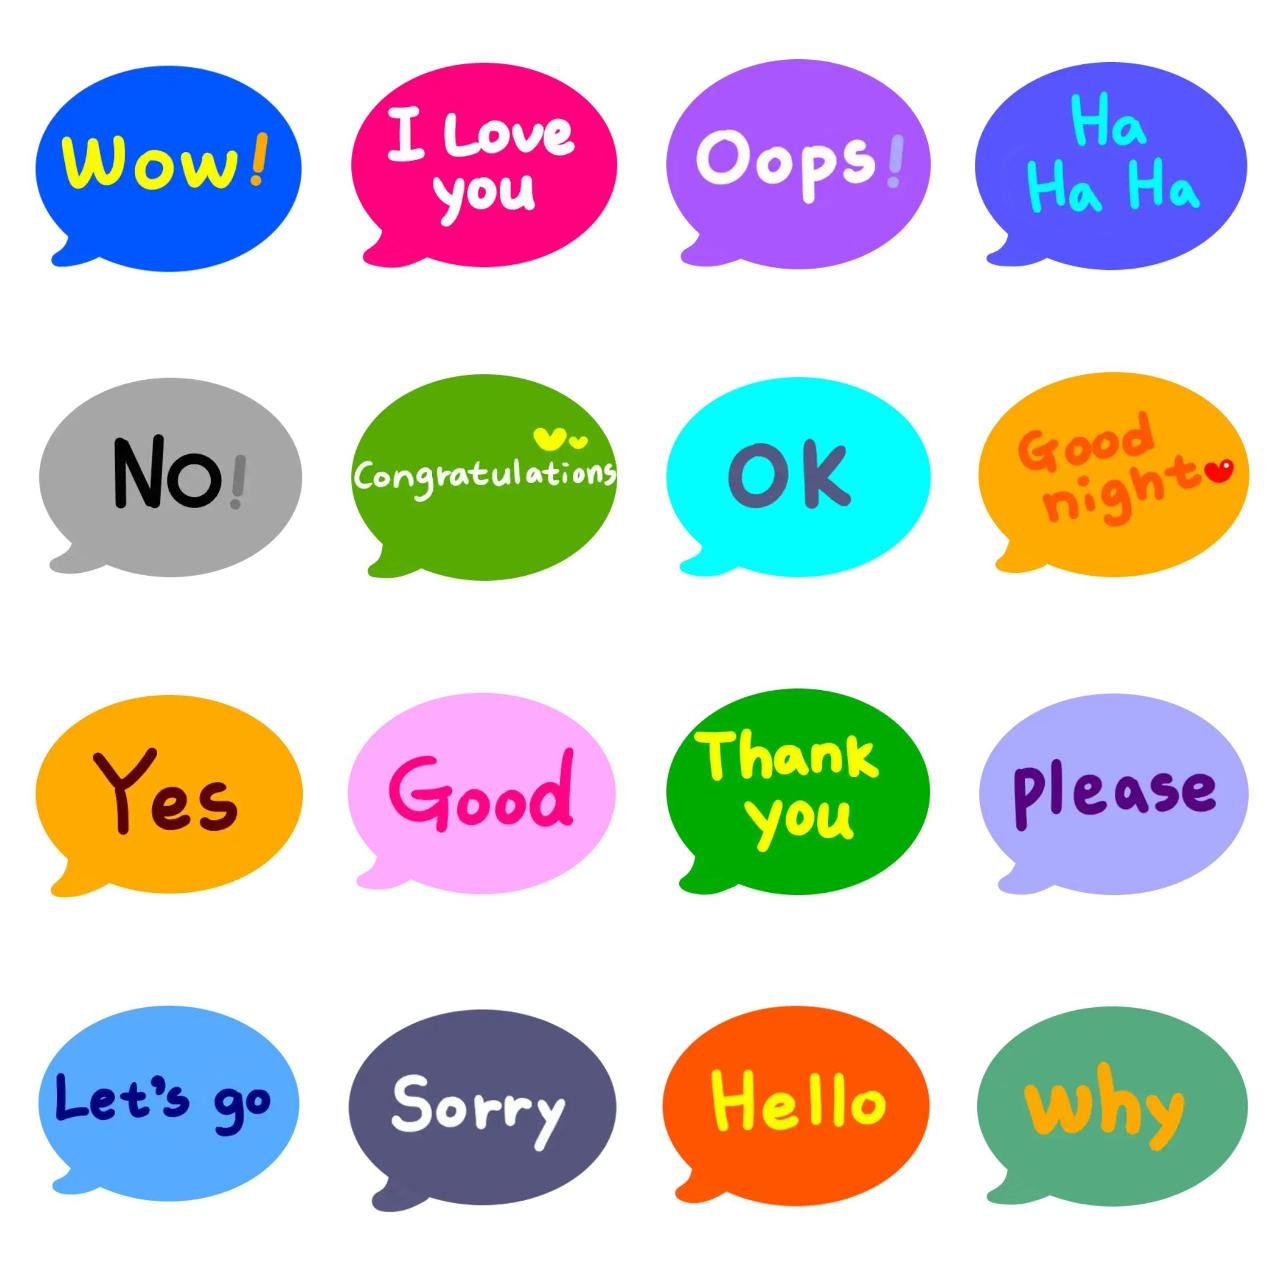 Thank you Phrases,Romance sticker pack for Whatsapp, Telegram, Signal, and others chatting and message apps